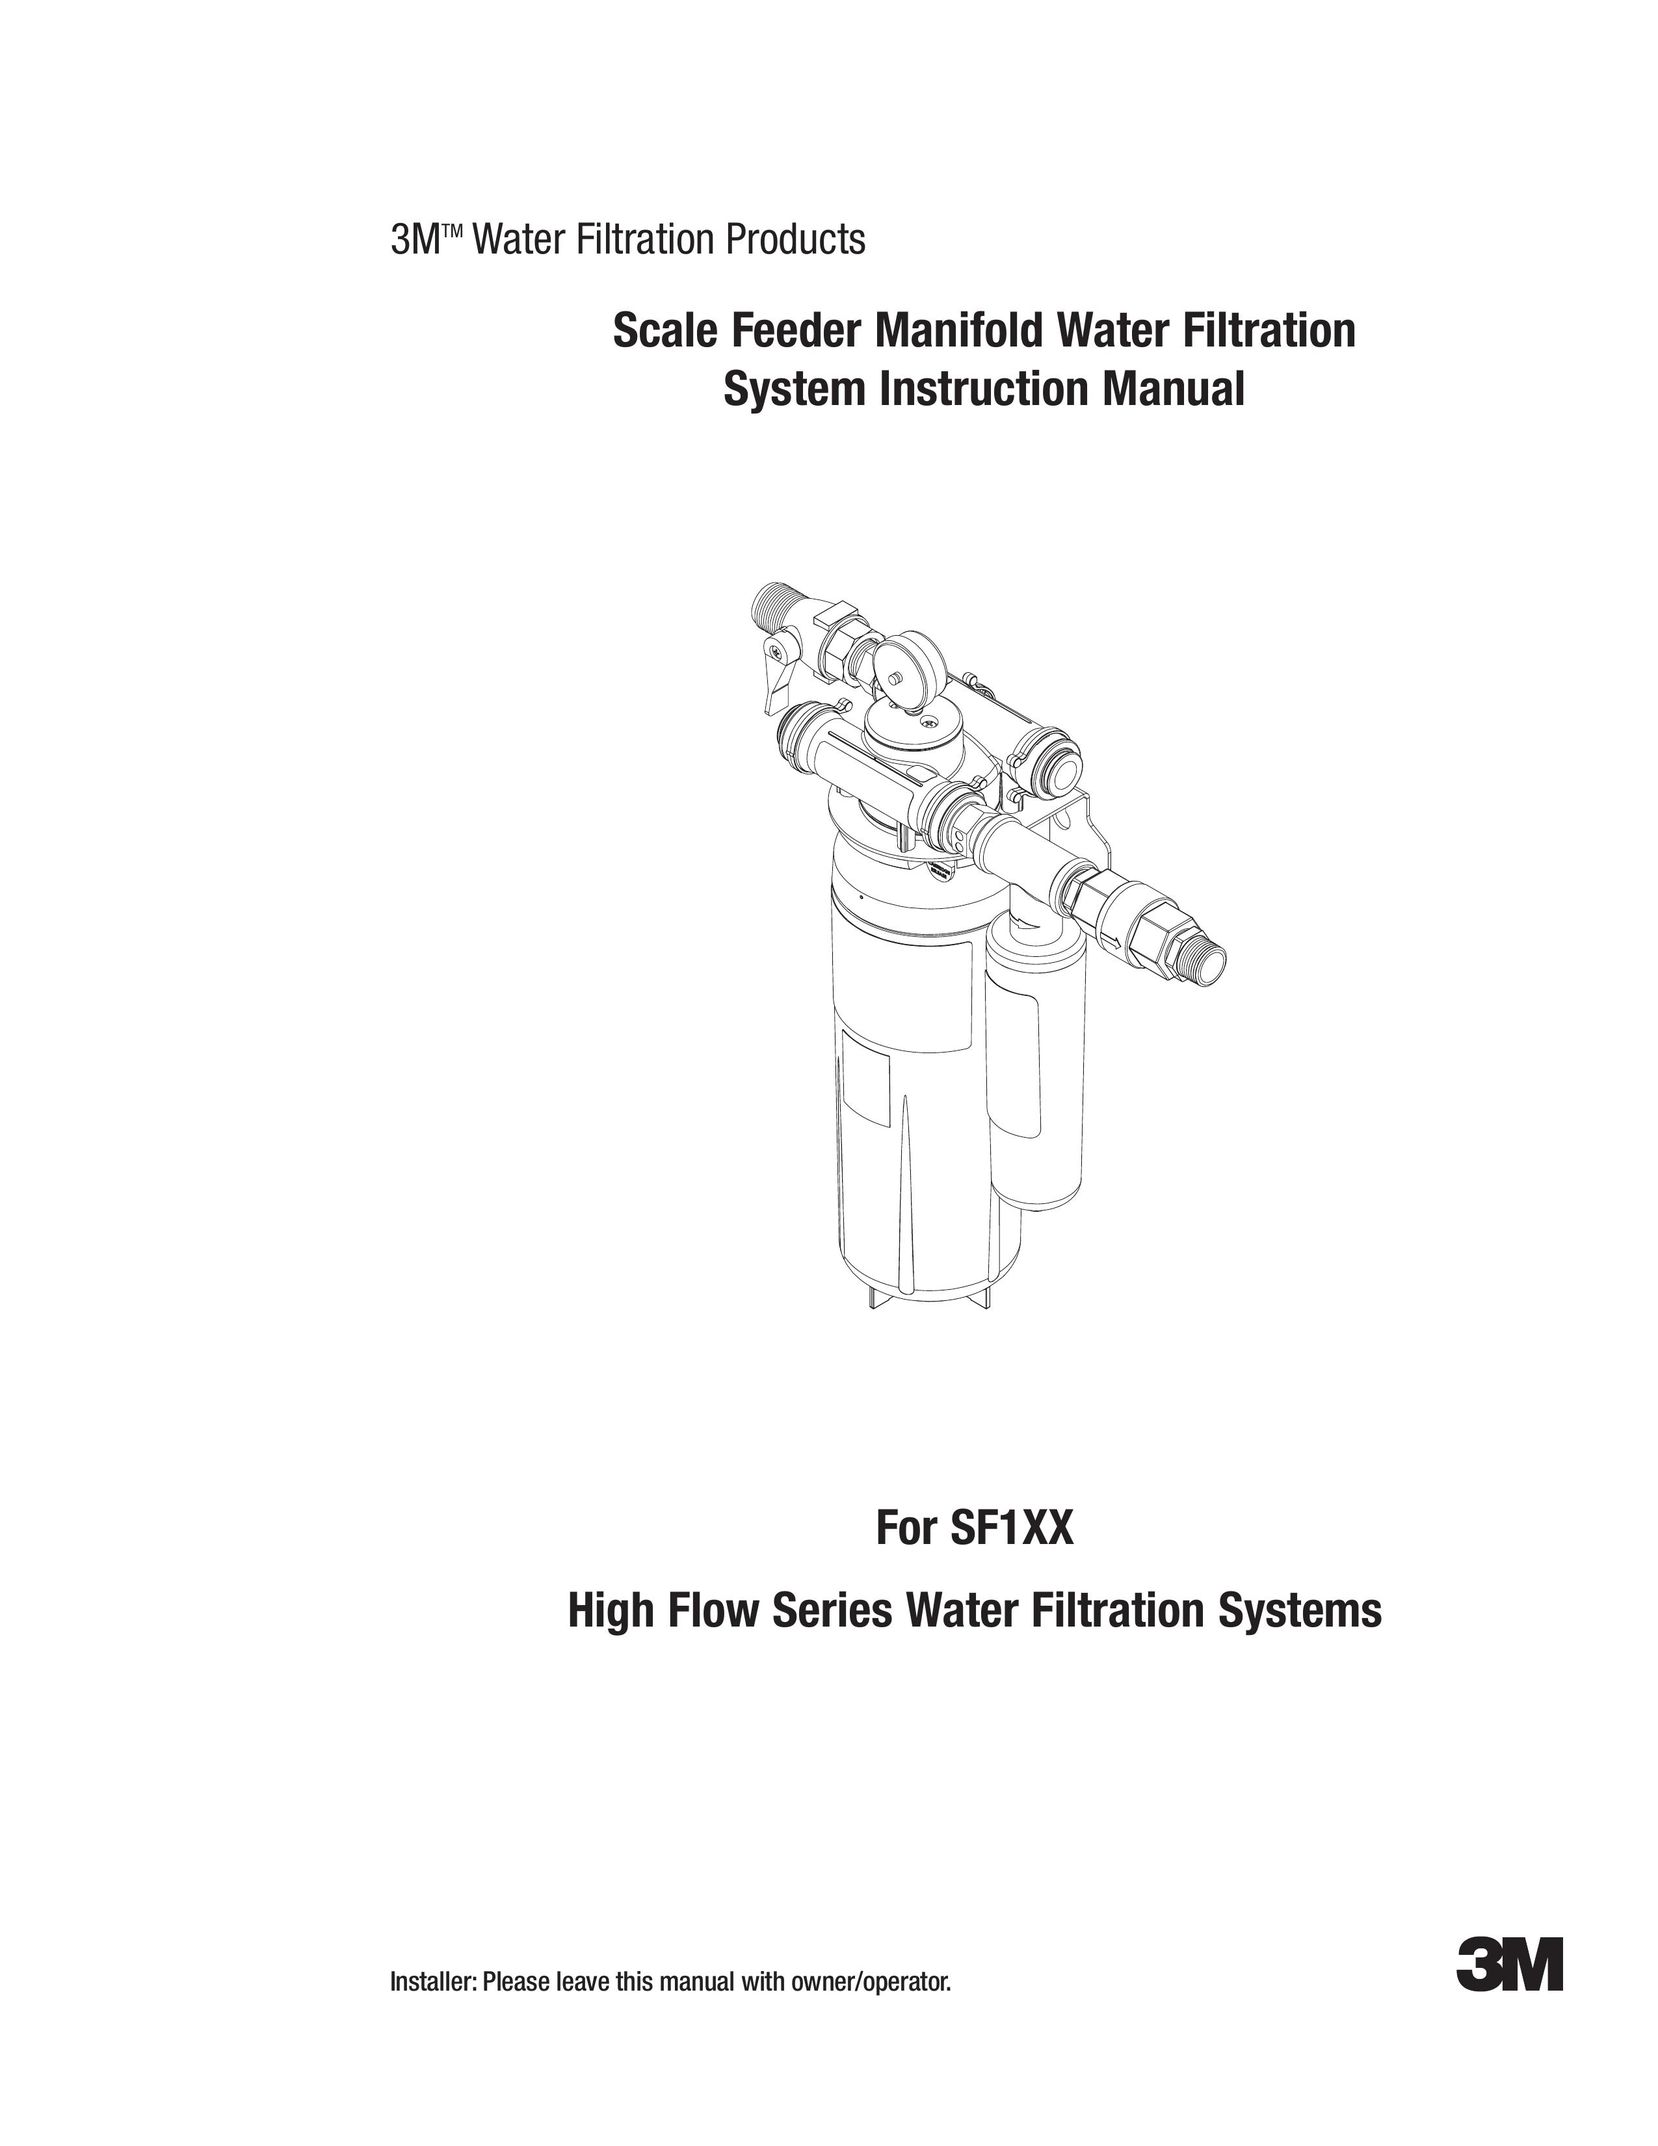 3M SF1XX Water System User Manual